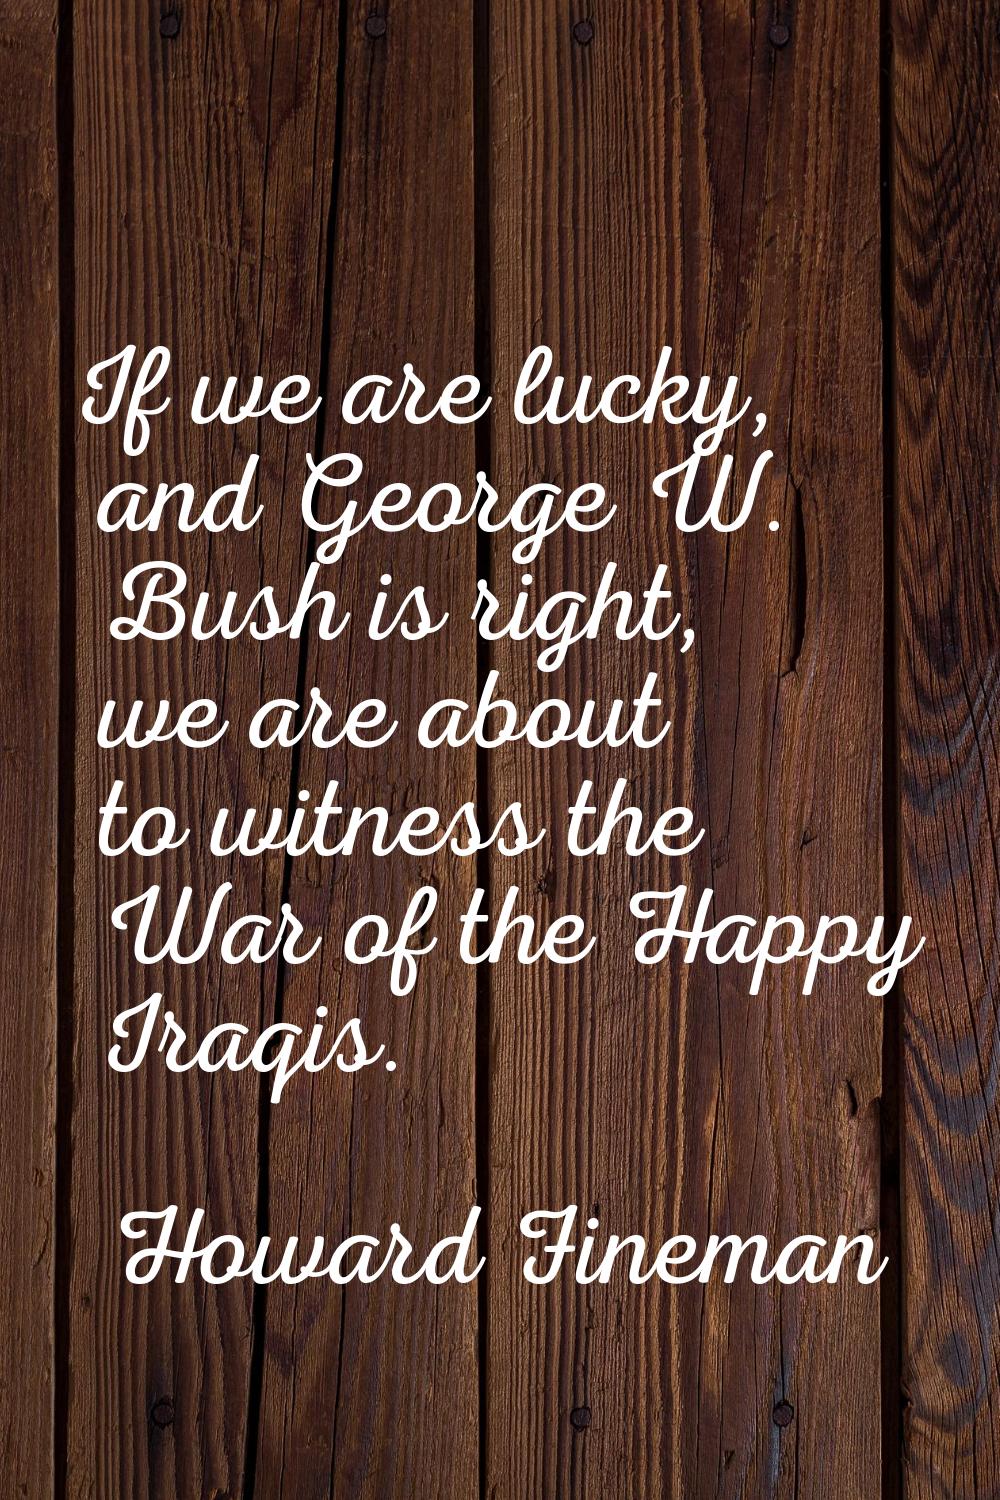 If we are lucky, and George W. Bush is right, we are about to witness the War of the Happy Iraqis.